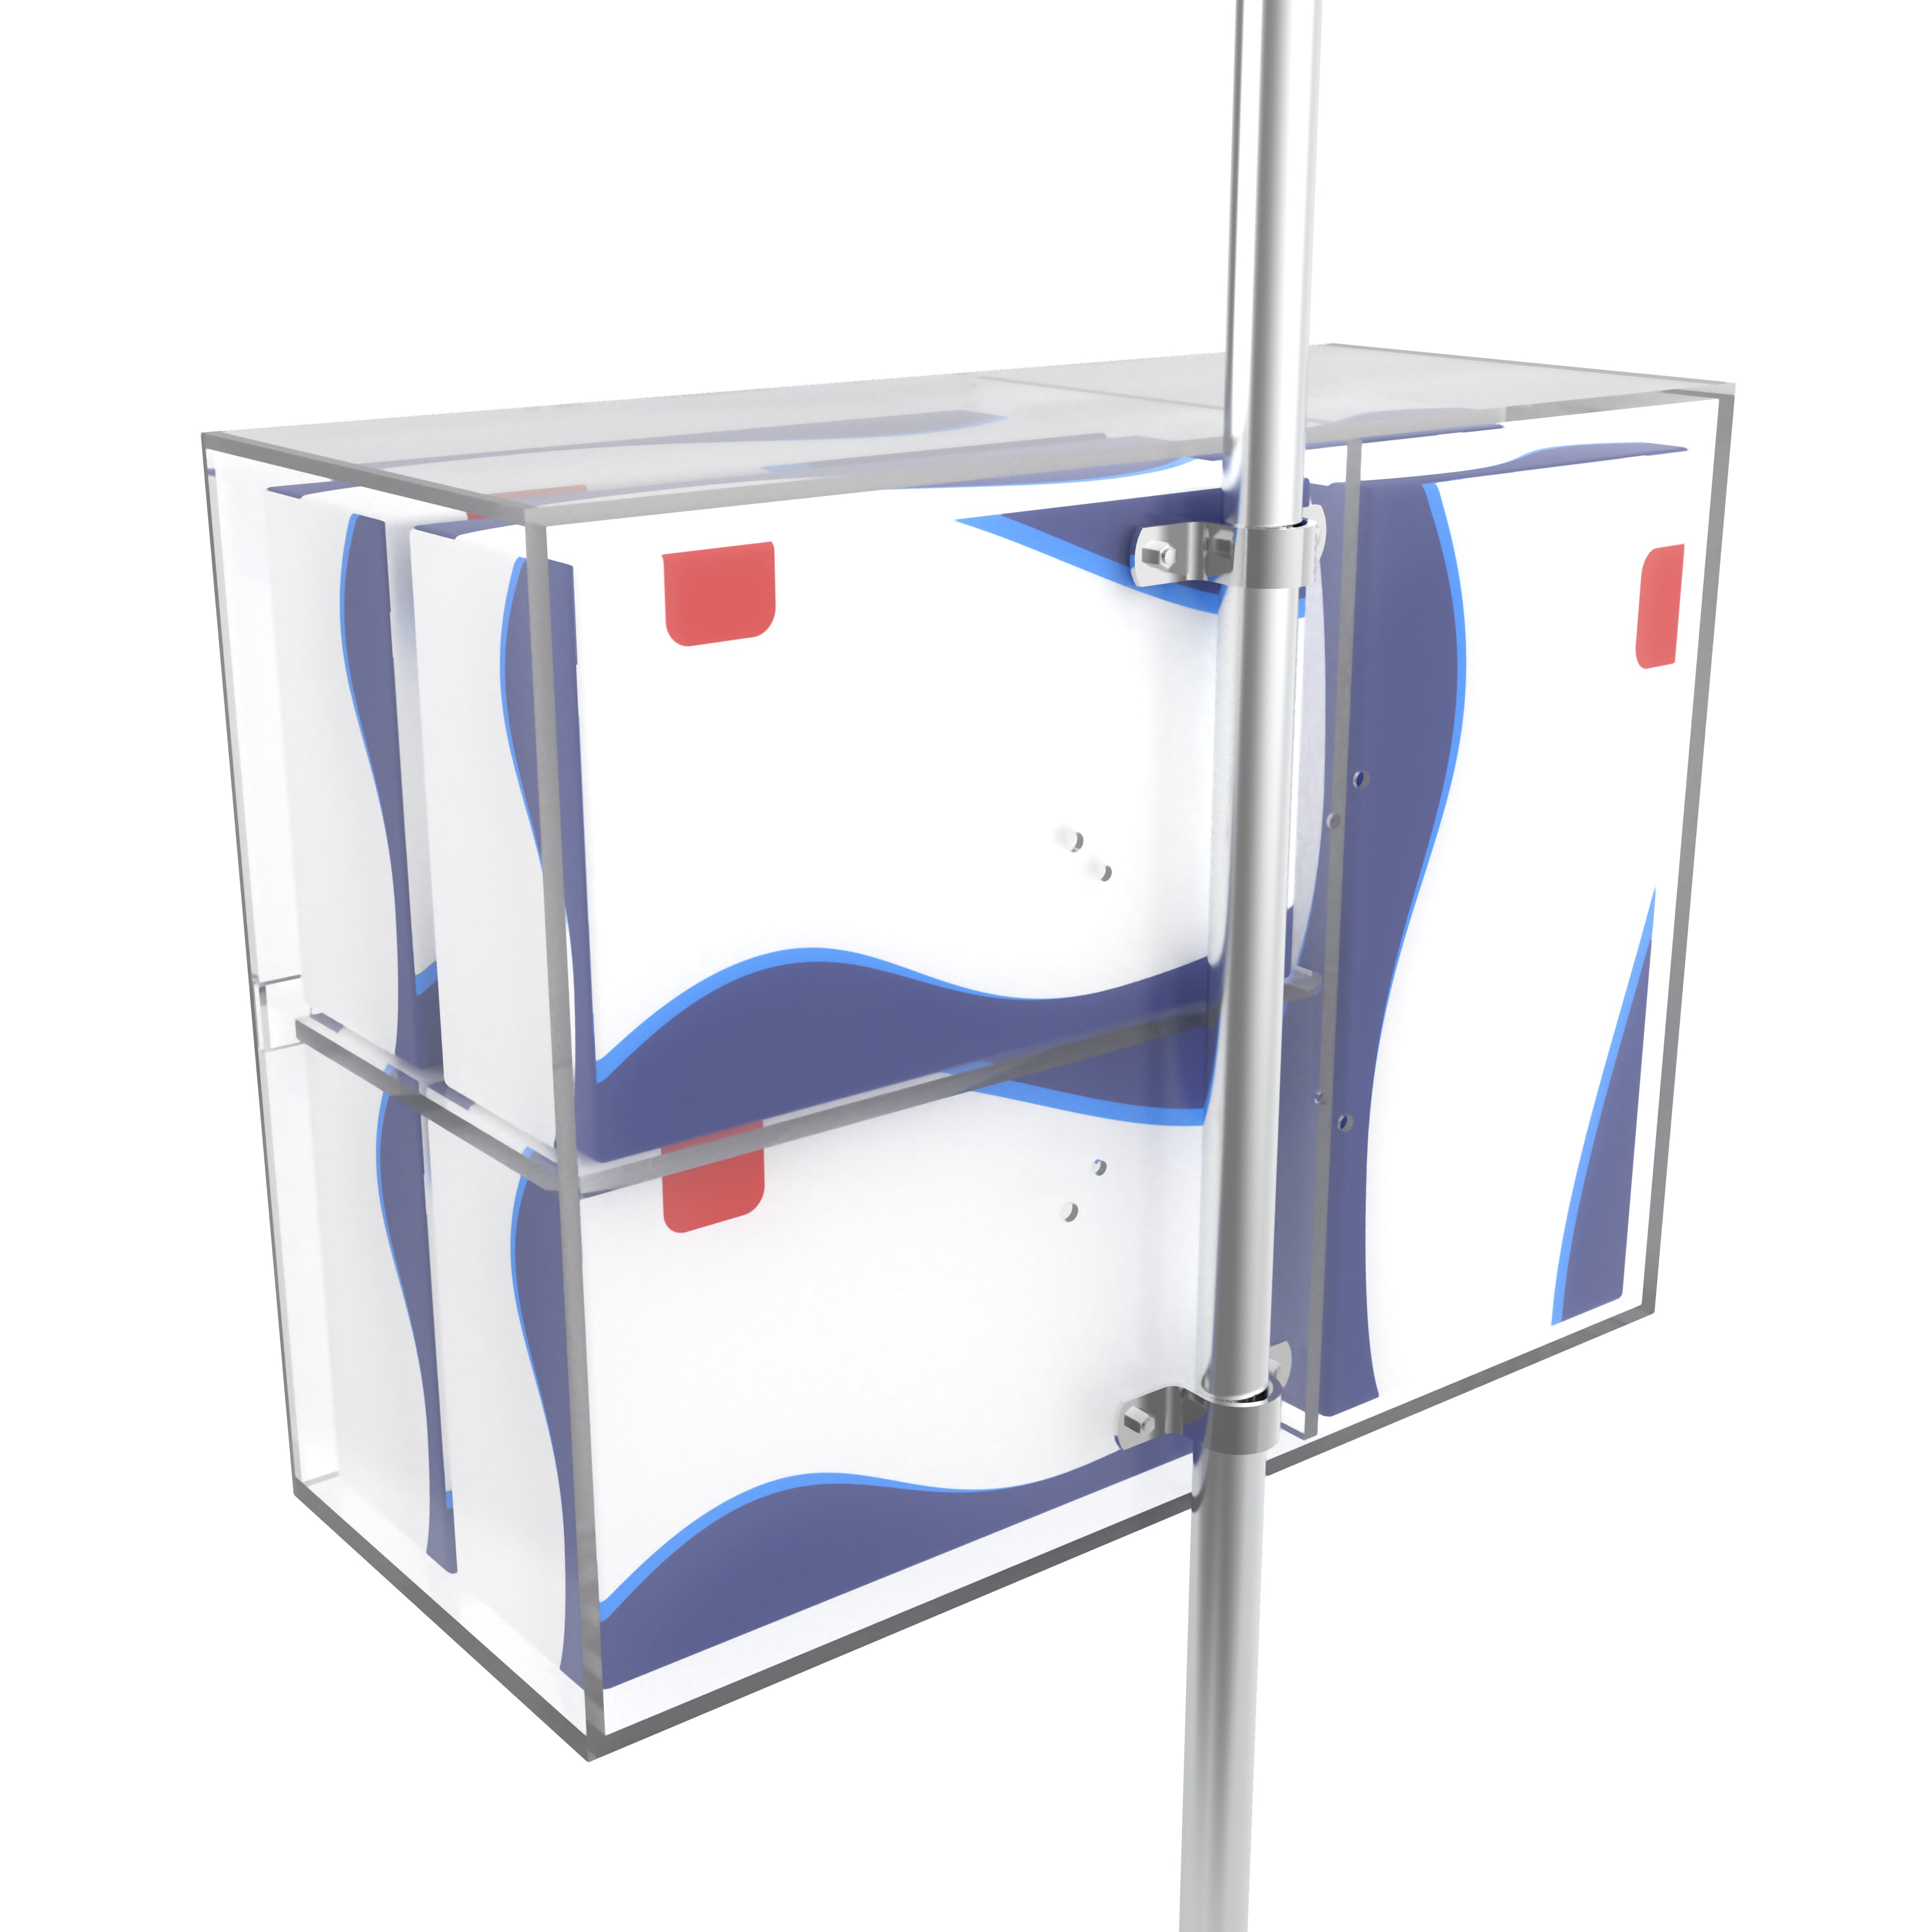 Security Box Acrylic Sanitizing Kit Compartment with VESA Compatibility for both Floor Stands and Wall Placement